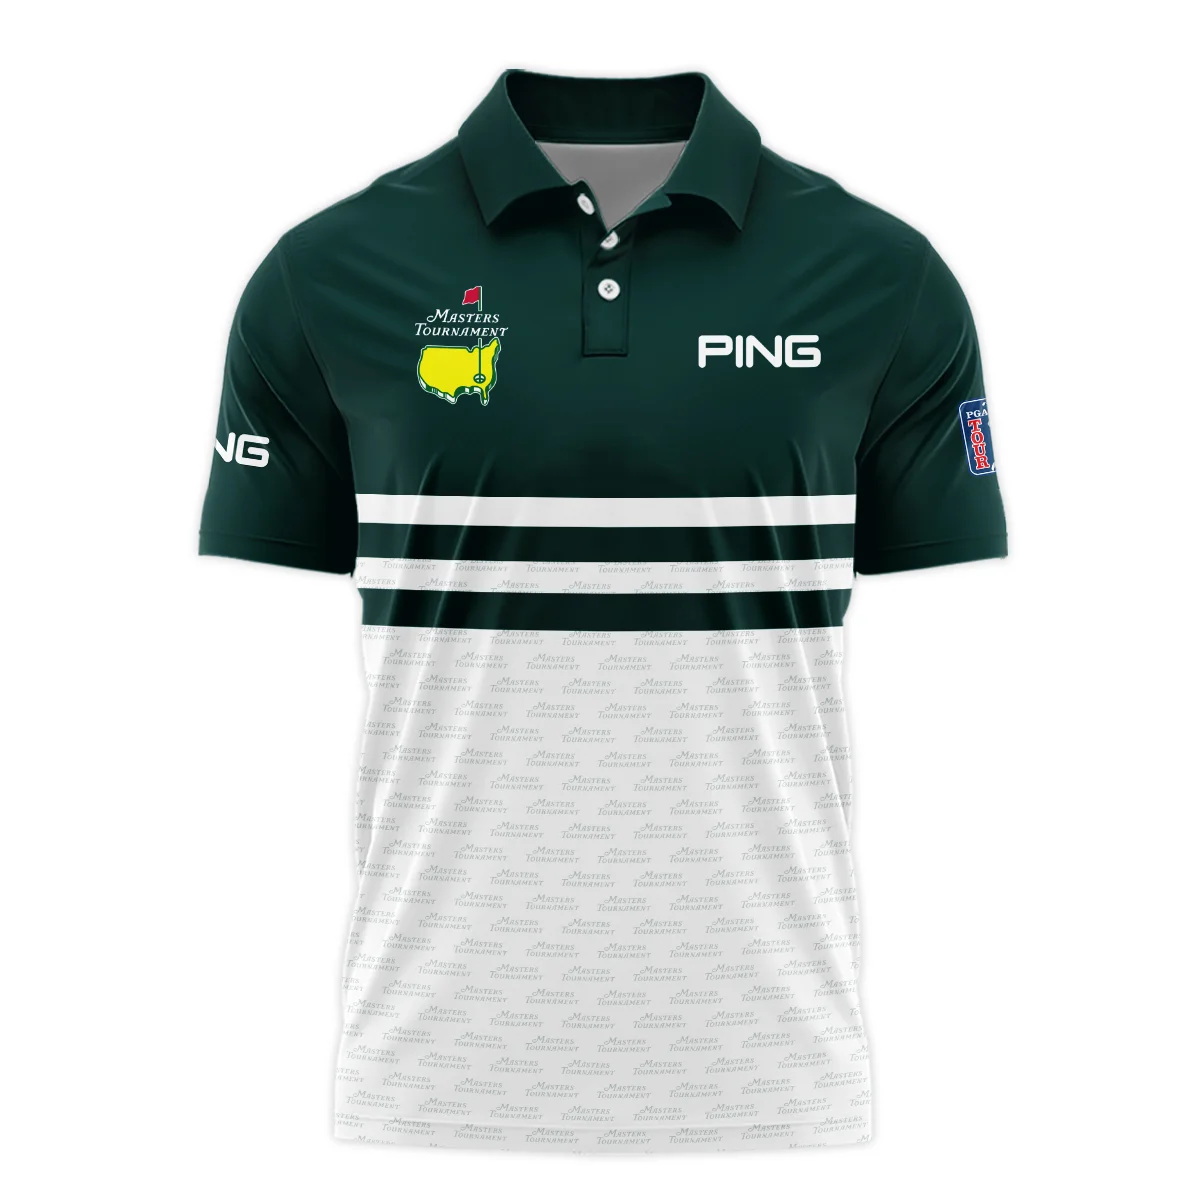 Dark Green Mix White With Logo Pattern Masters Tournament Ping Long Polo Shirt Style Classic Long Polo Shirt For Men